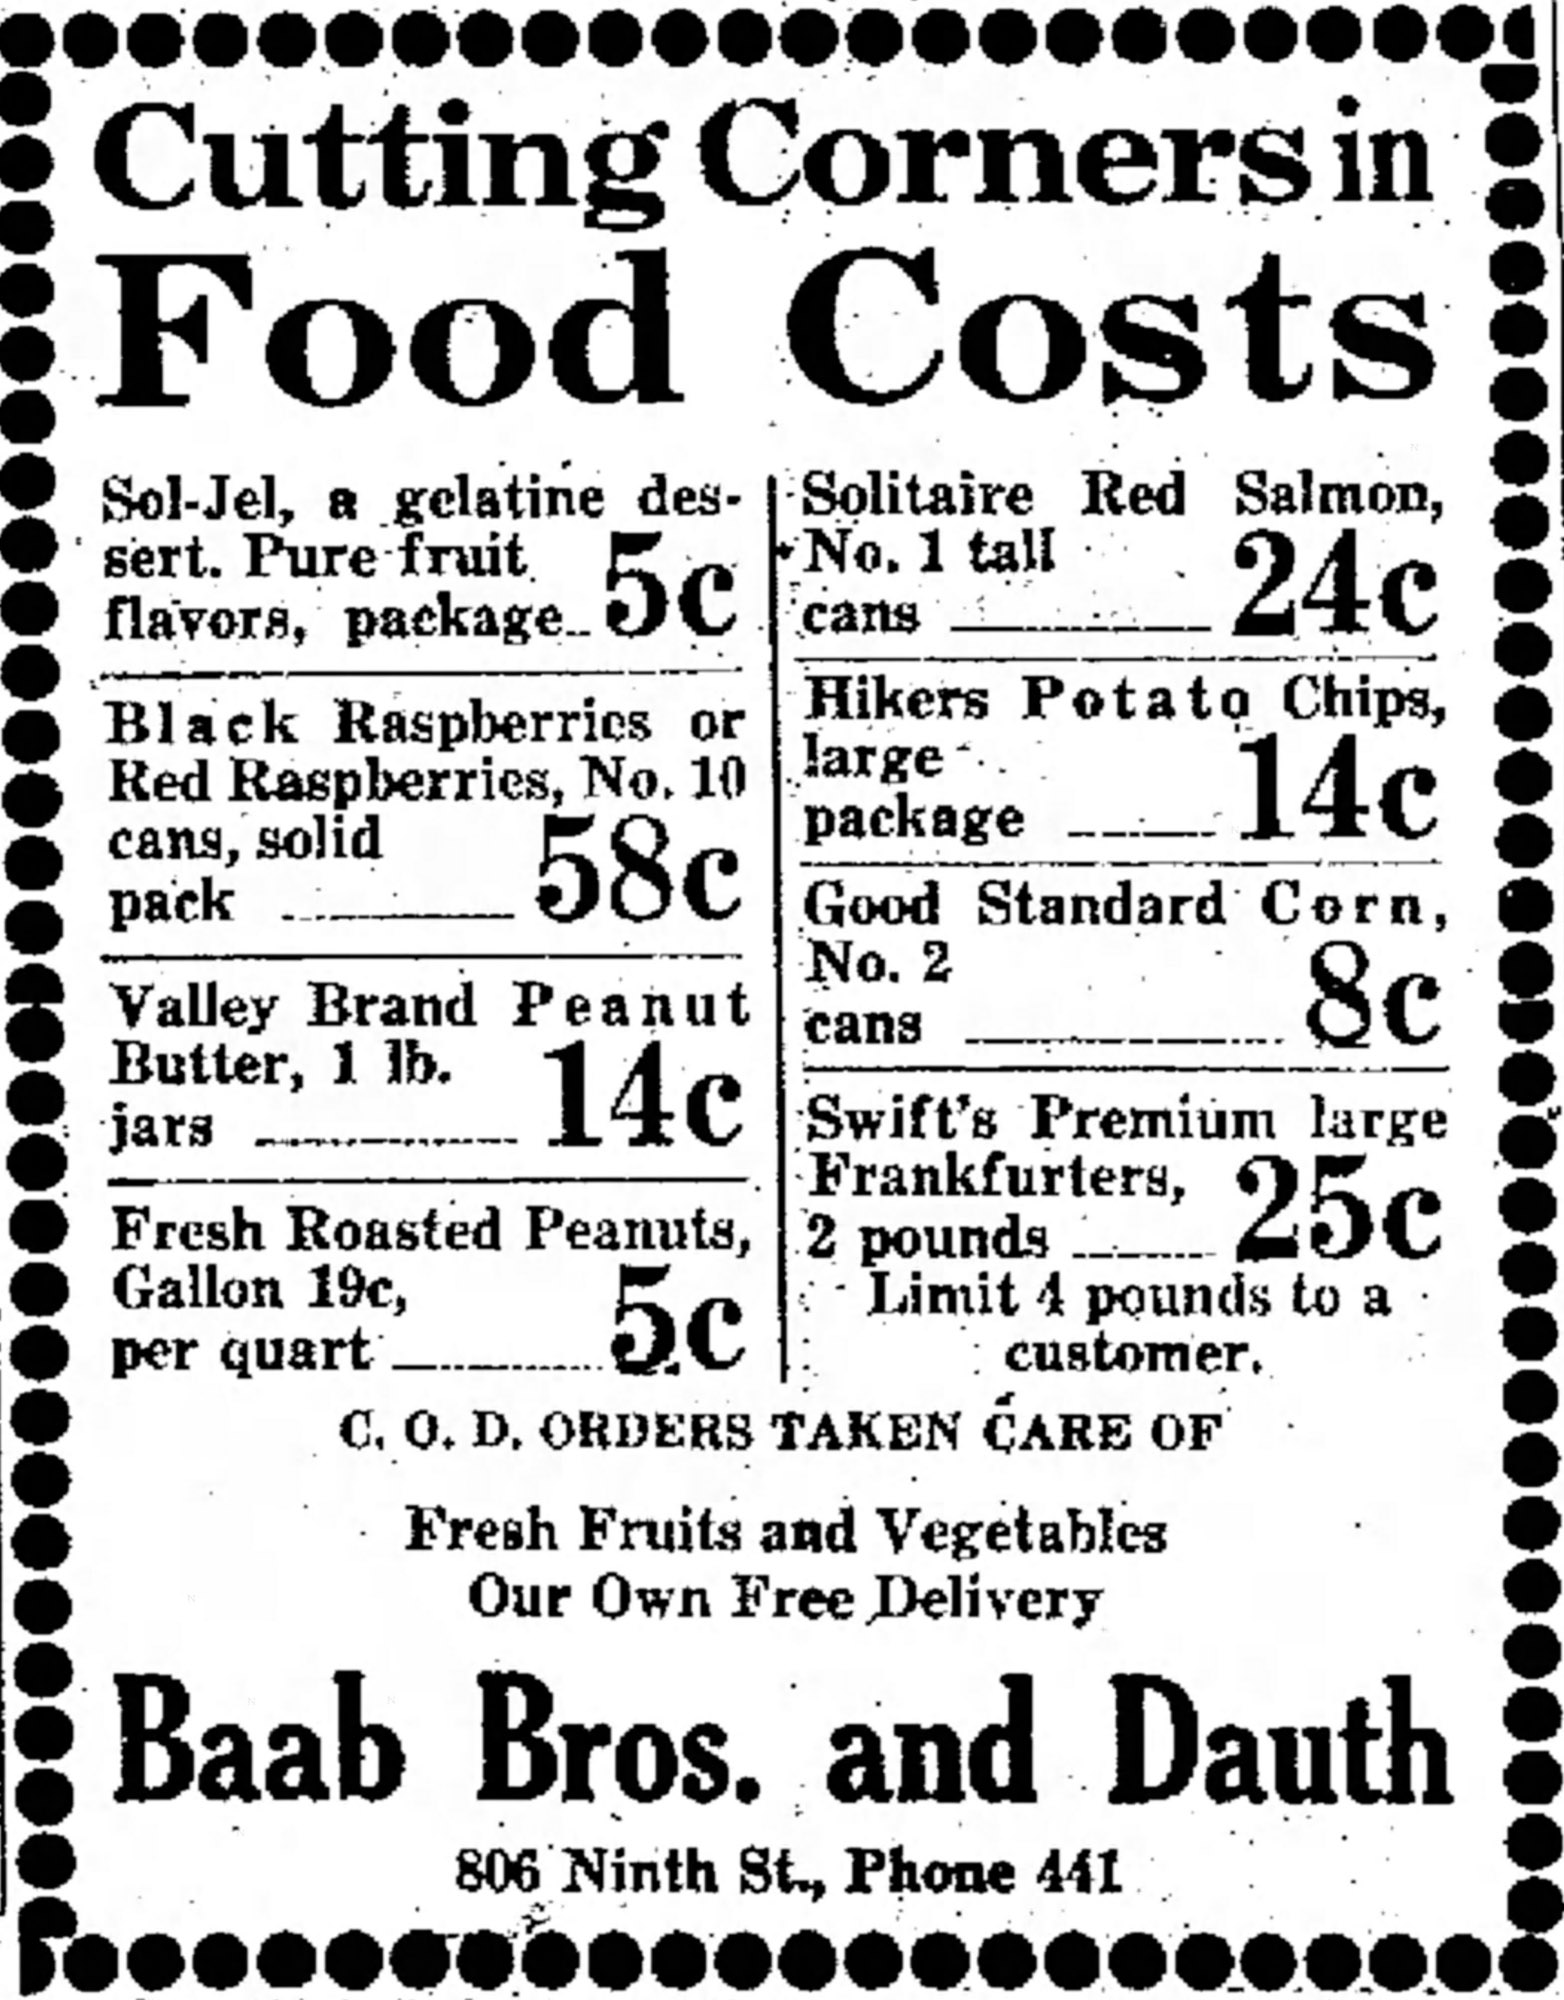 Dauth Family Archive - 1932-05-11 - Greeley Daily Tribune - Baab Bros and Dauth Advertisement